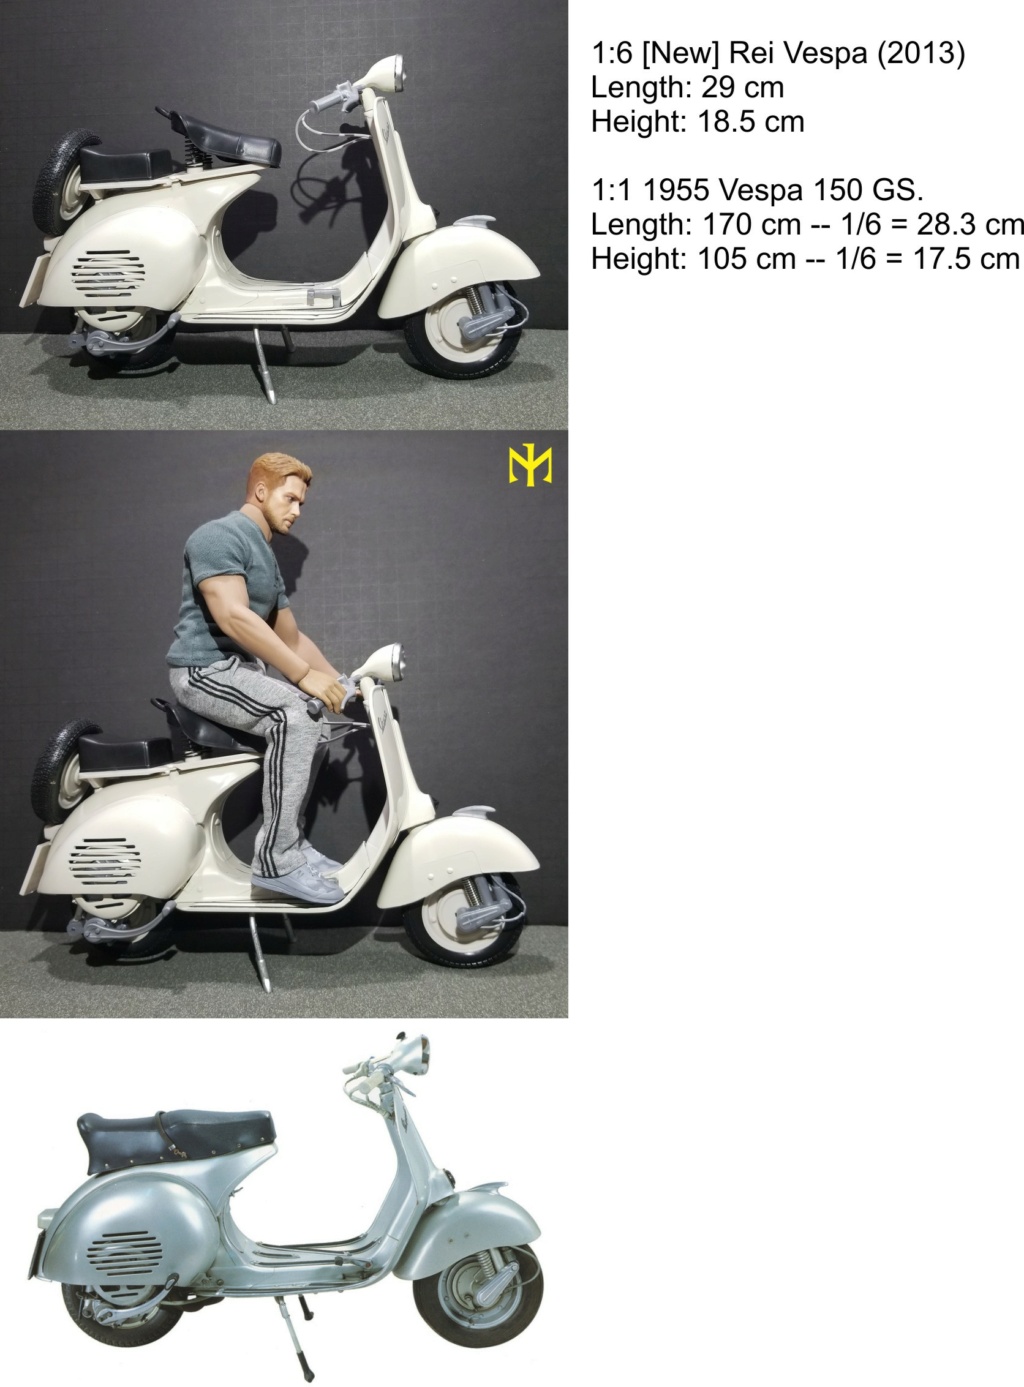 Motorcycles - 1/6 Scale Motorcyles & 1/1 Motorcycles -- Size & Design -- Problems for 1/6 scale - Page 2 Moto0710